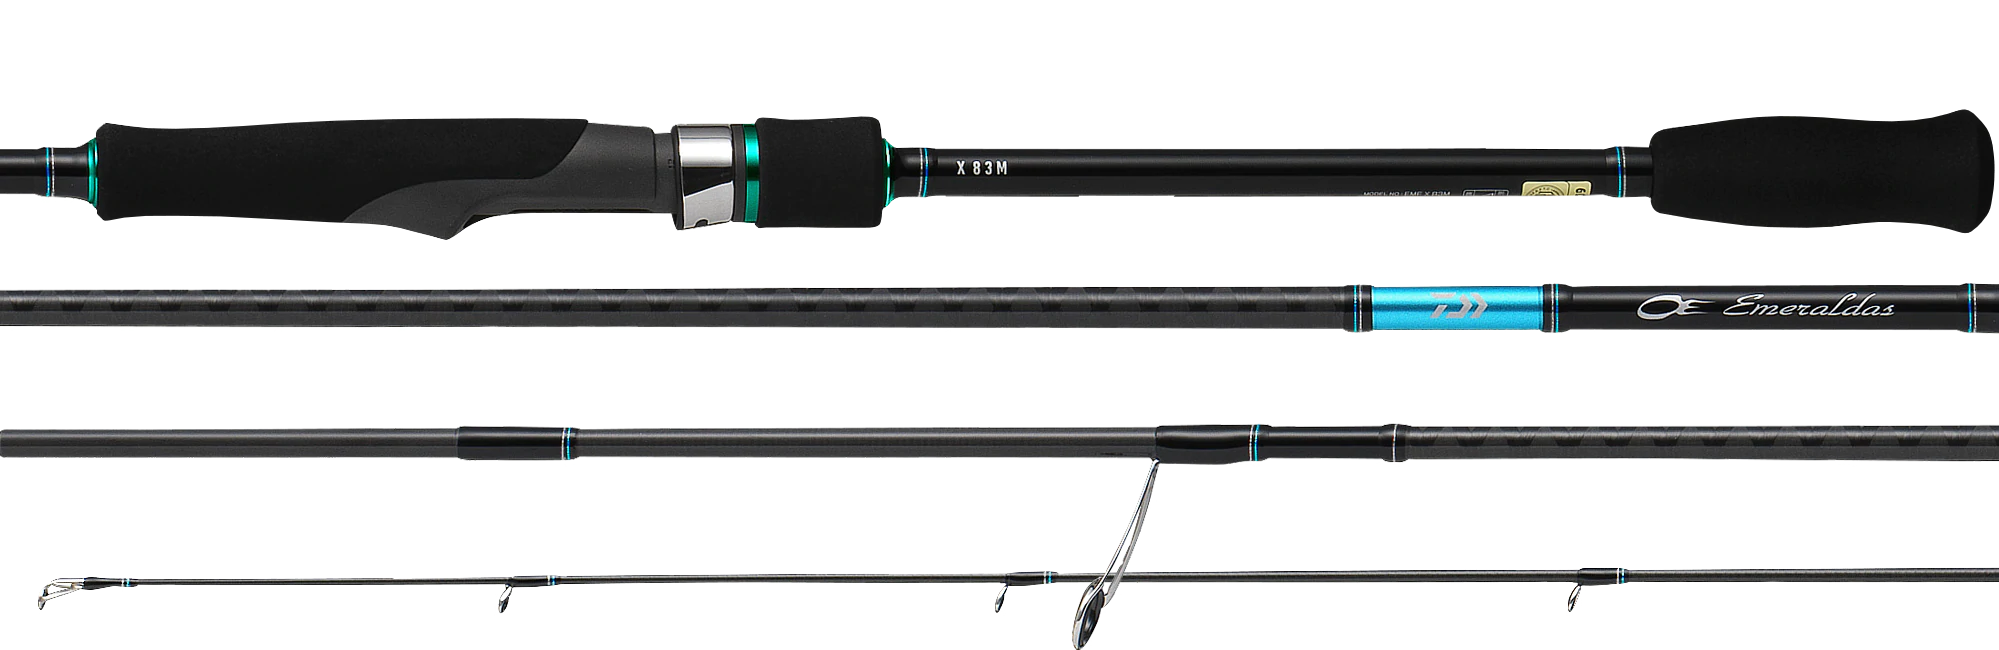 Daiwa Emeraldas X Spin Rods (Eging/Squid Game) - Compleat Angler